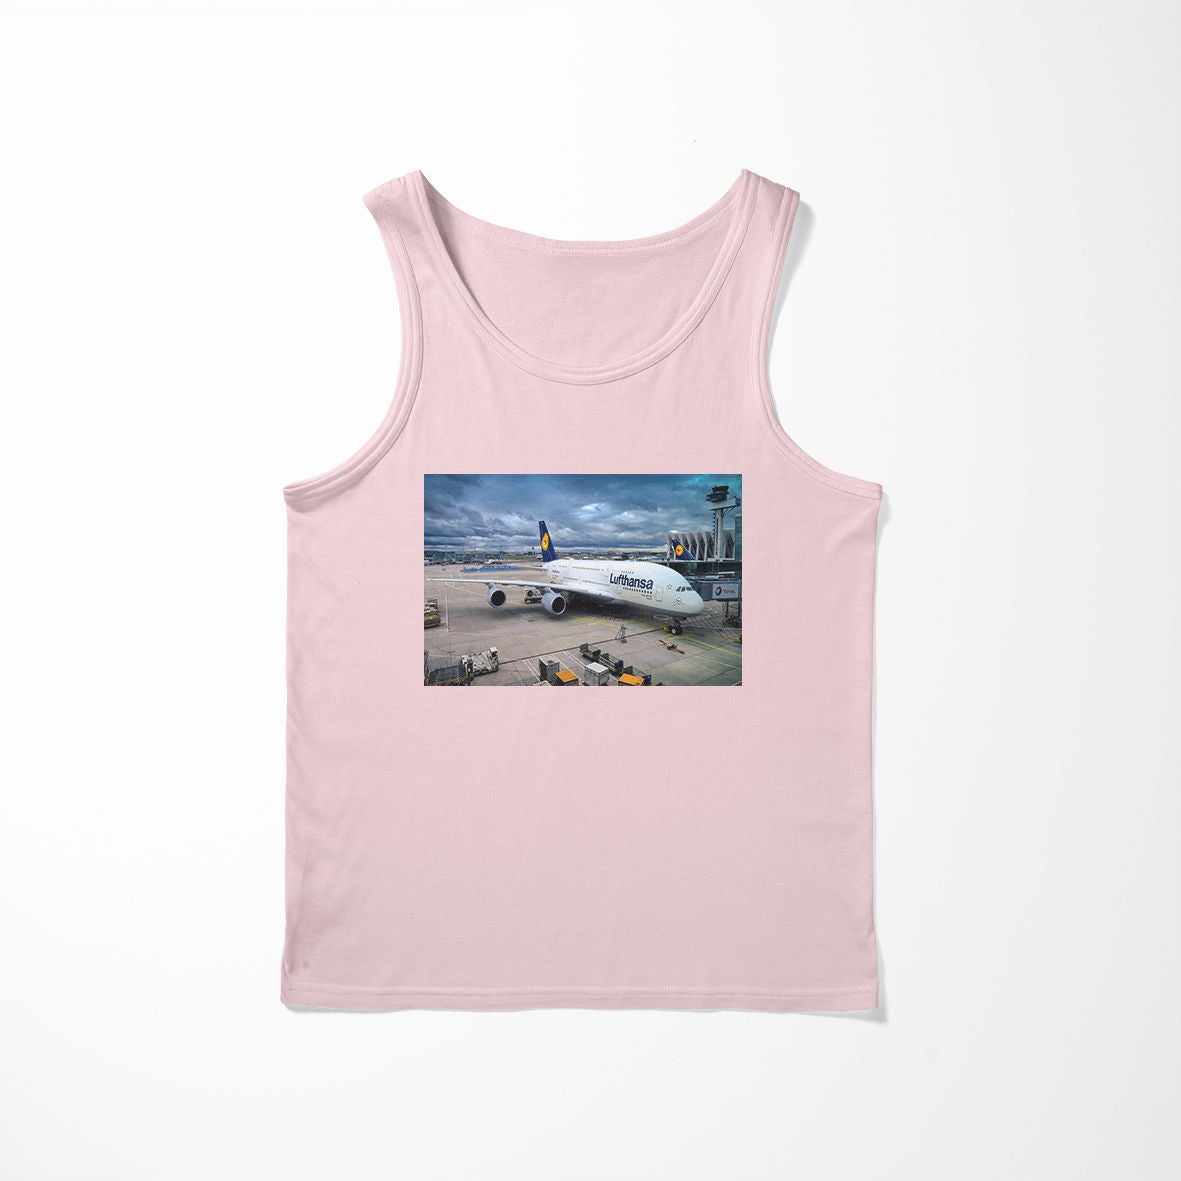 Lufthansa's A380 At The Gate Designed Tank Tops